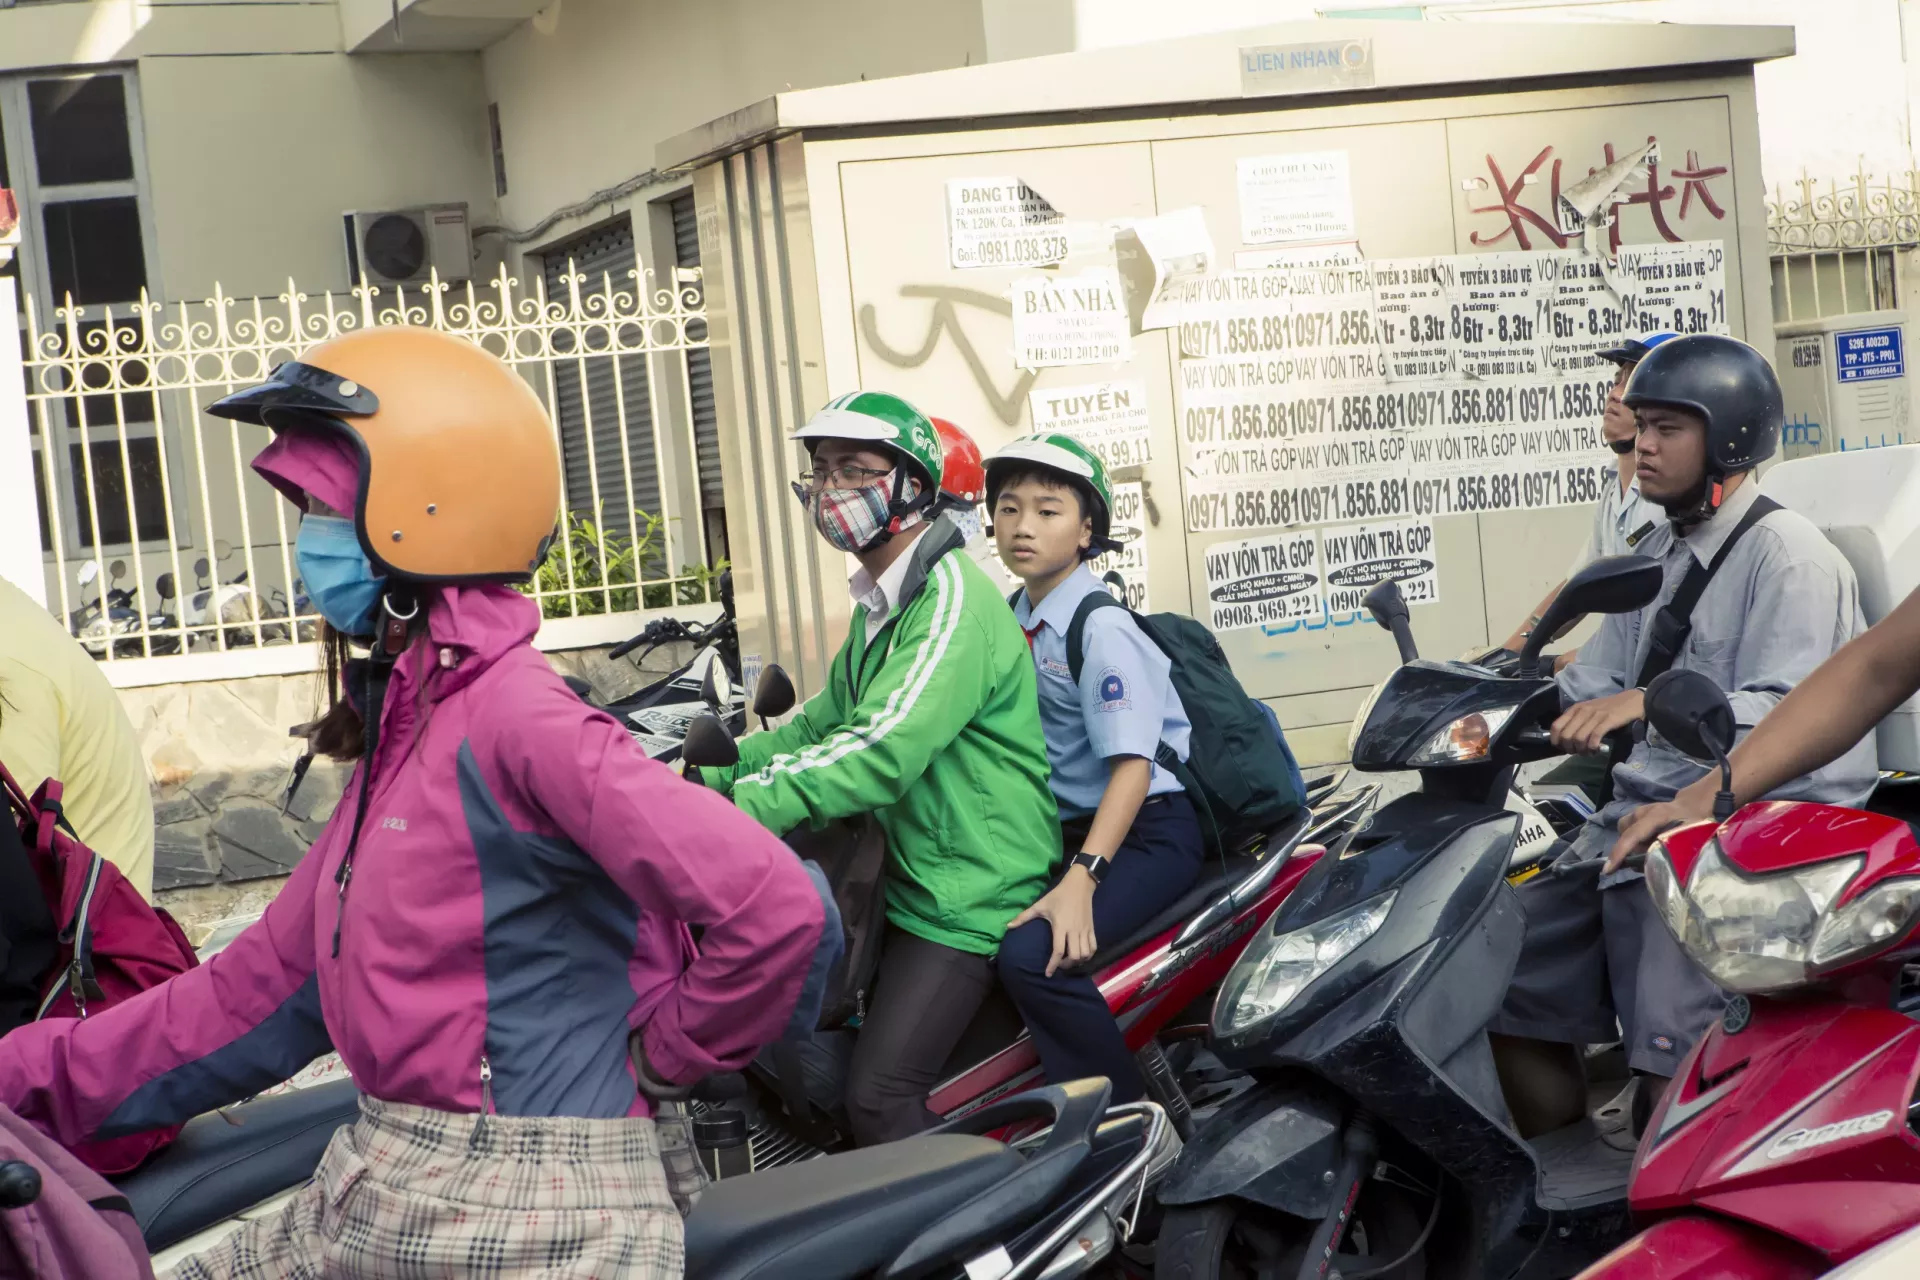 A Grab driver and a boy ride a motorbike on the street